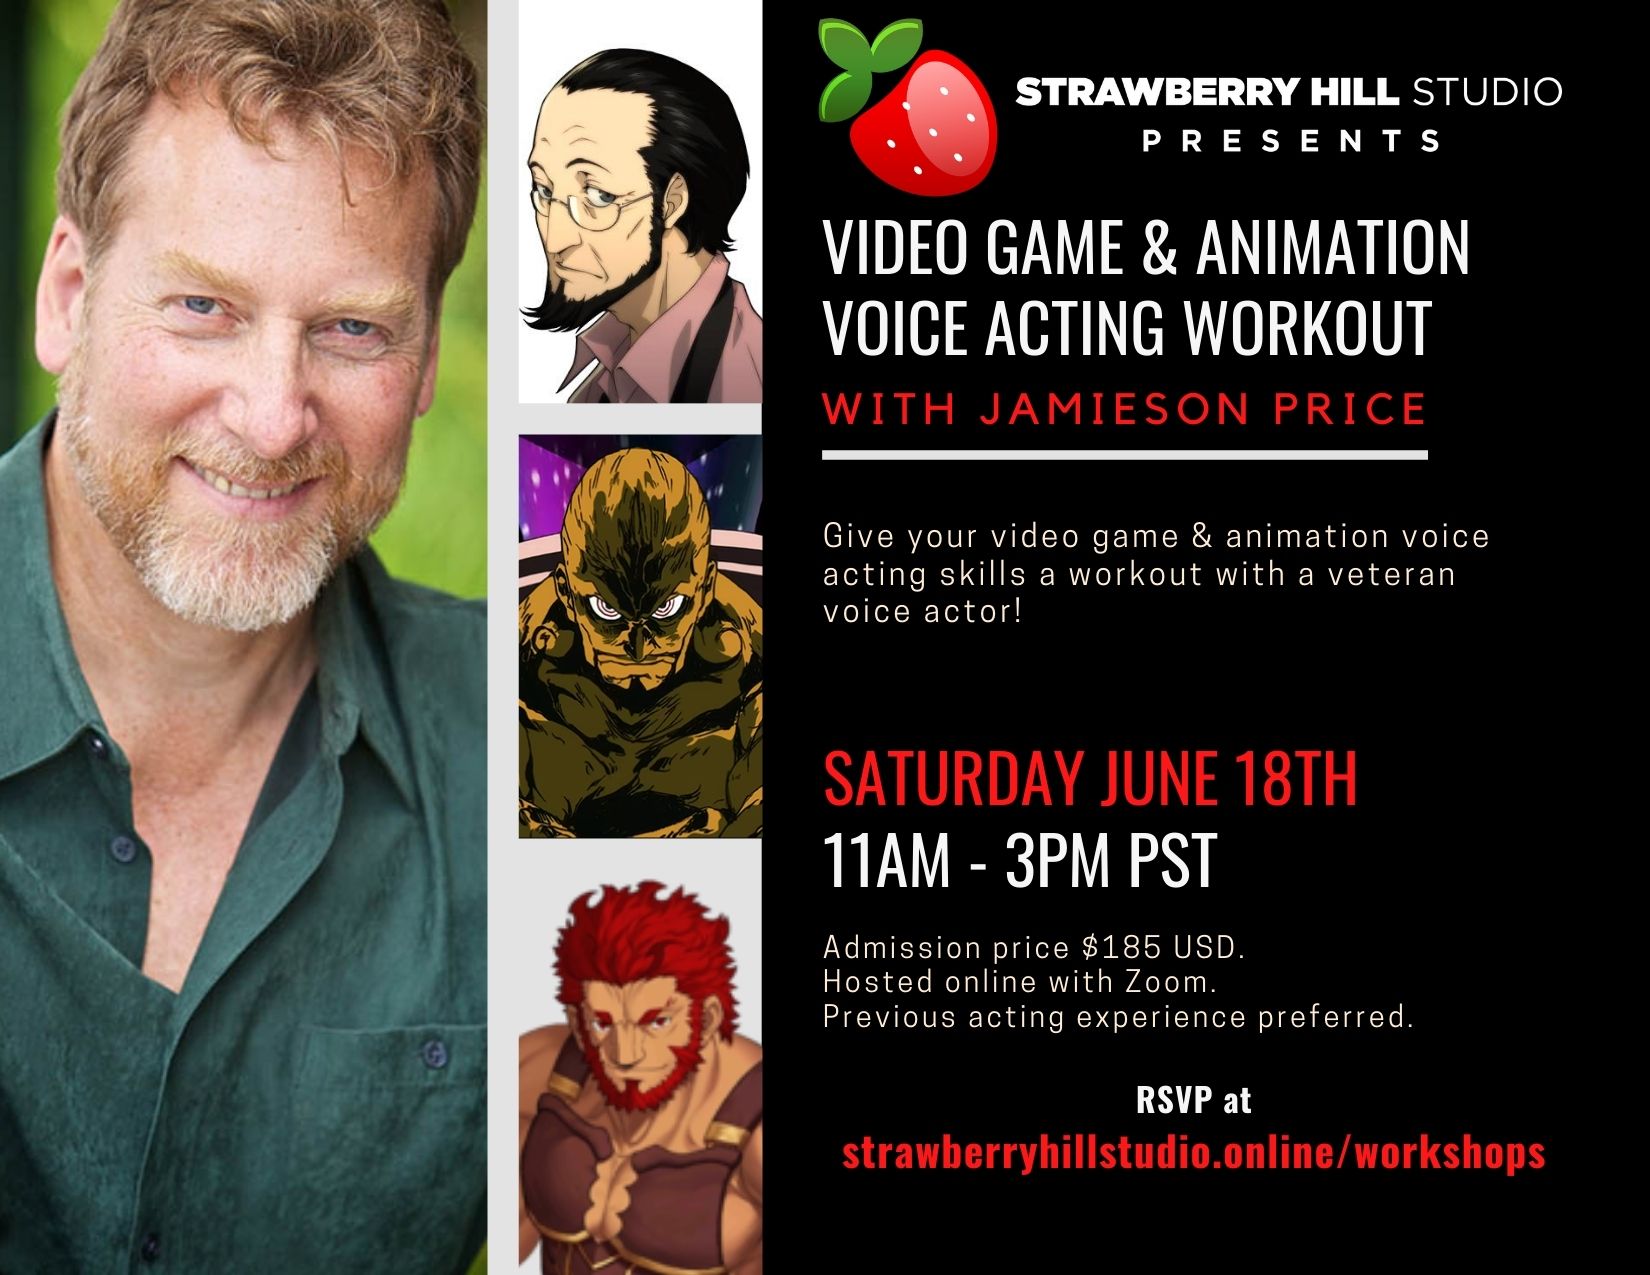 Video Games & Animation Voice Acting Workout w/ Jamieson Price